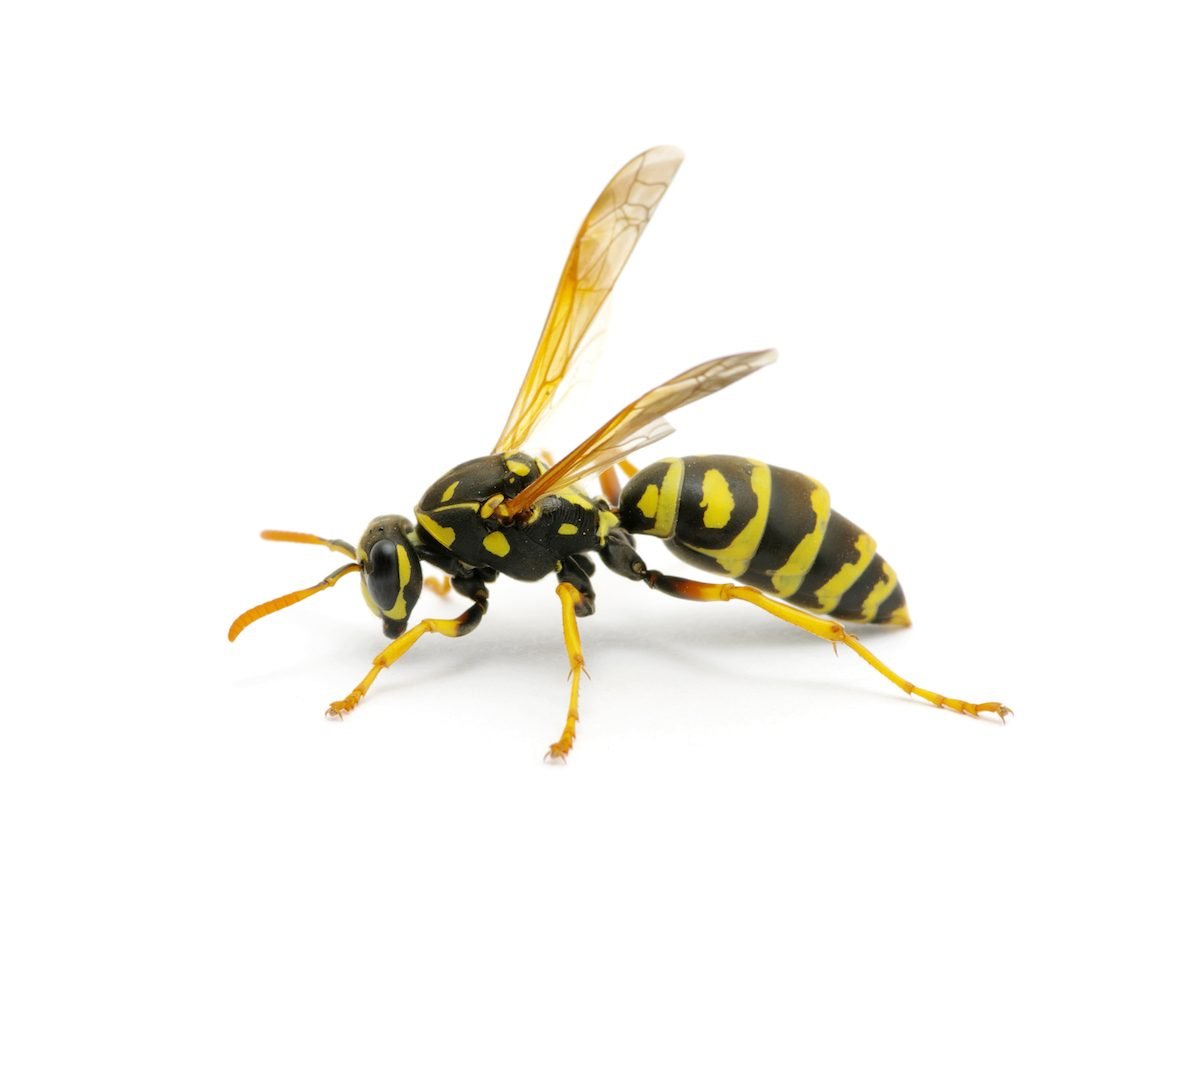 6 Key Differences Between Bees and Wasps